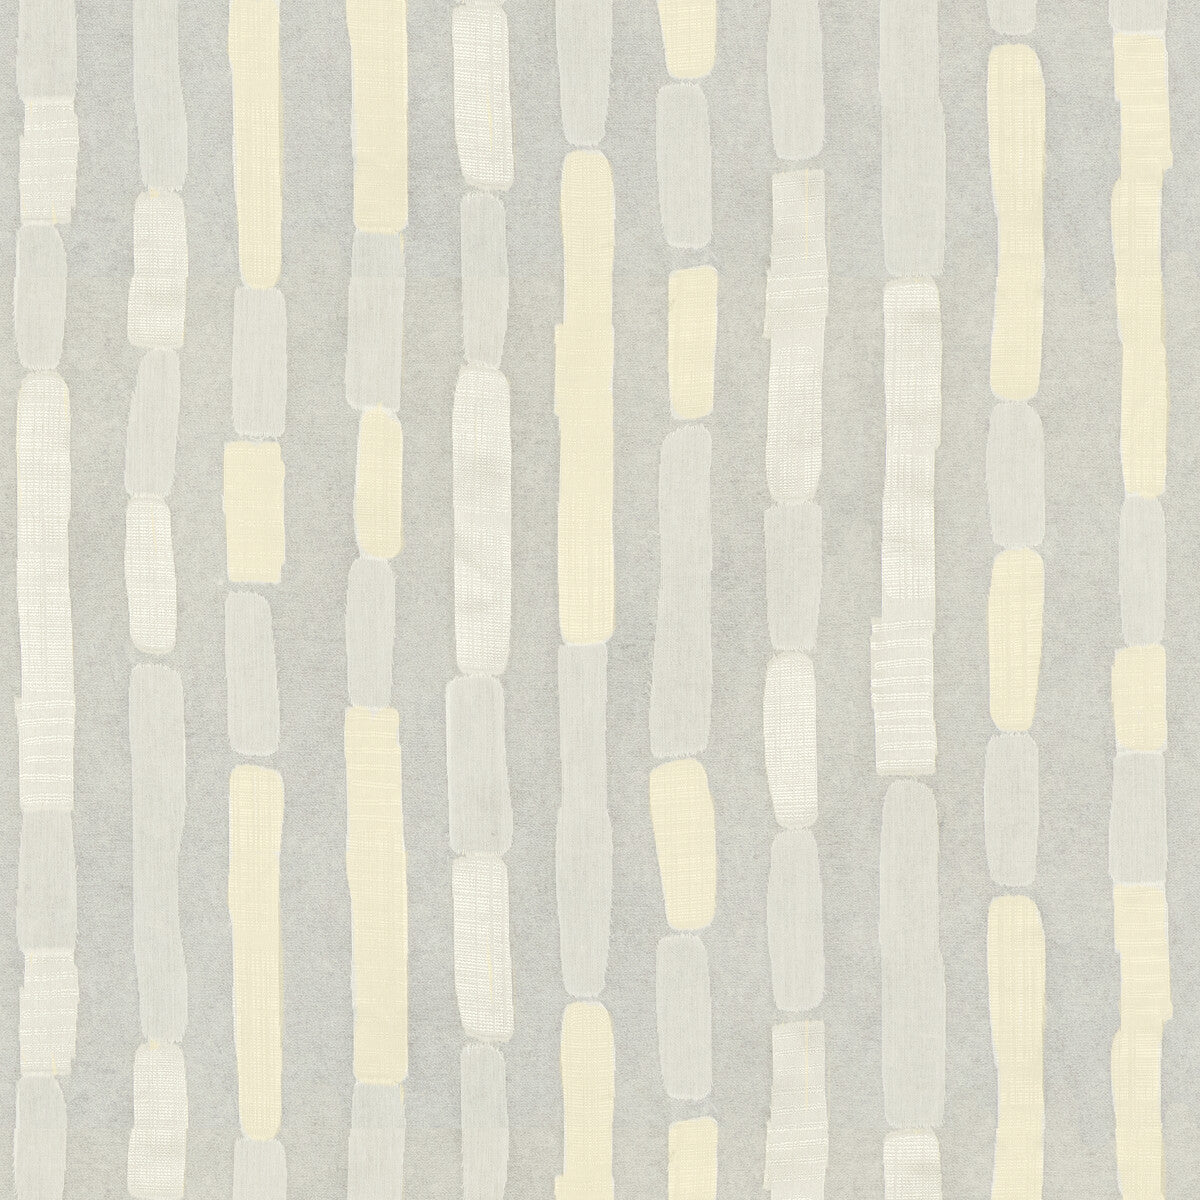 Kravet Contract fabric in 4527-1 color - pattern 4527.1.0 - by Kravet Contract